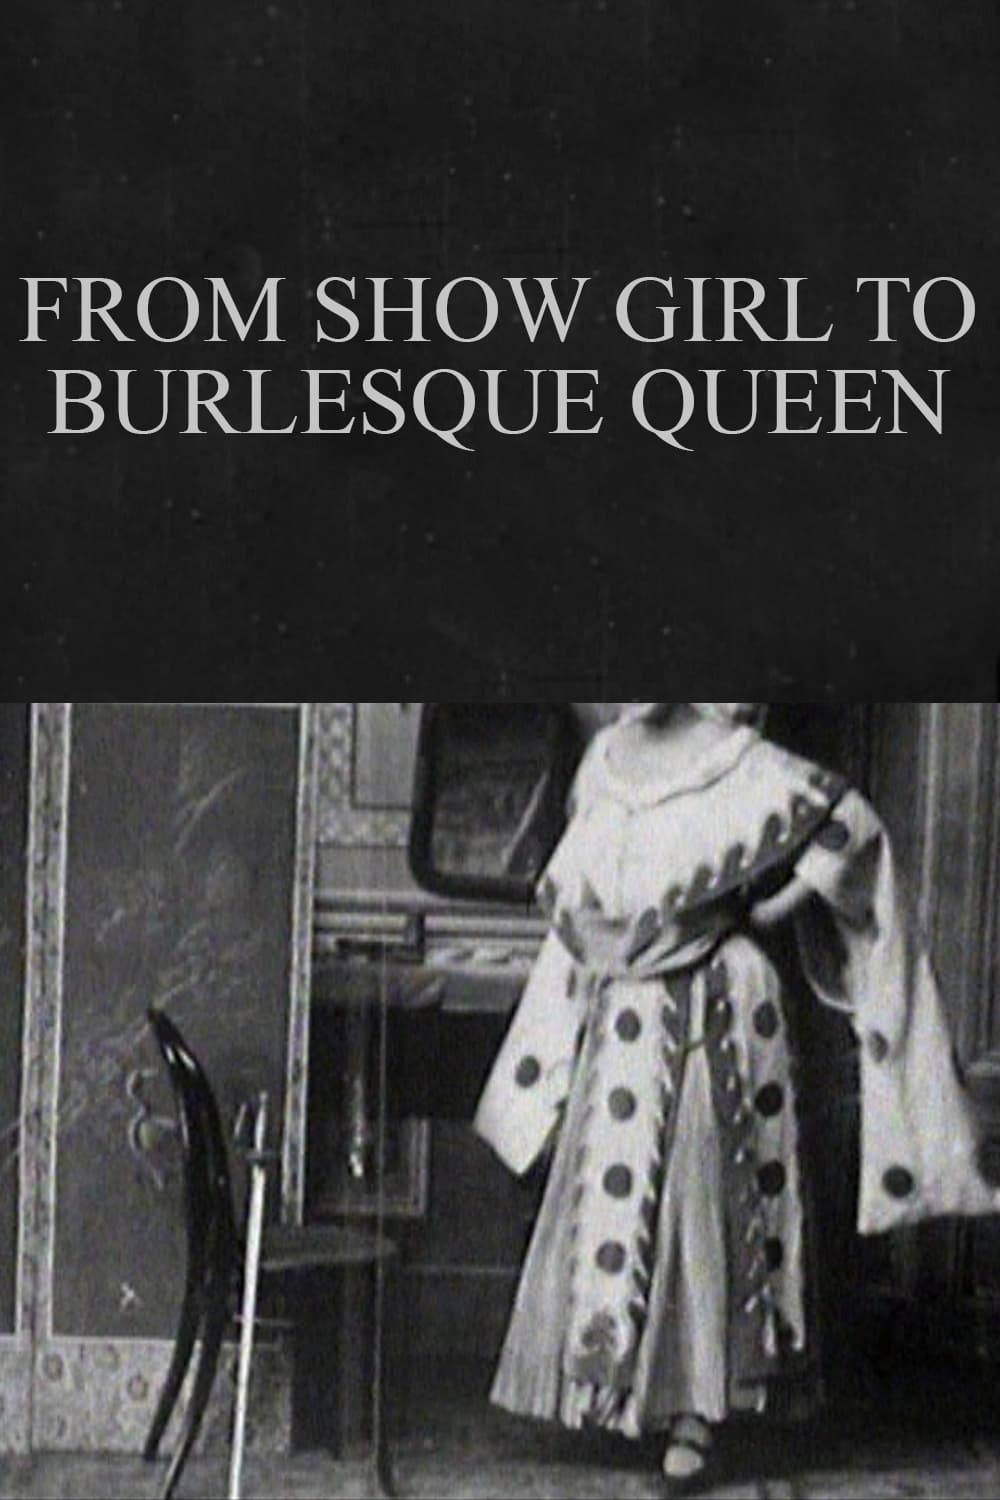 From Show Girl to Burlesque Queen